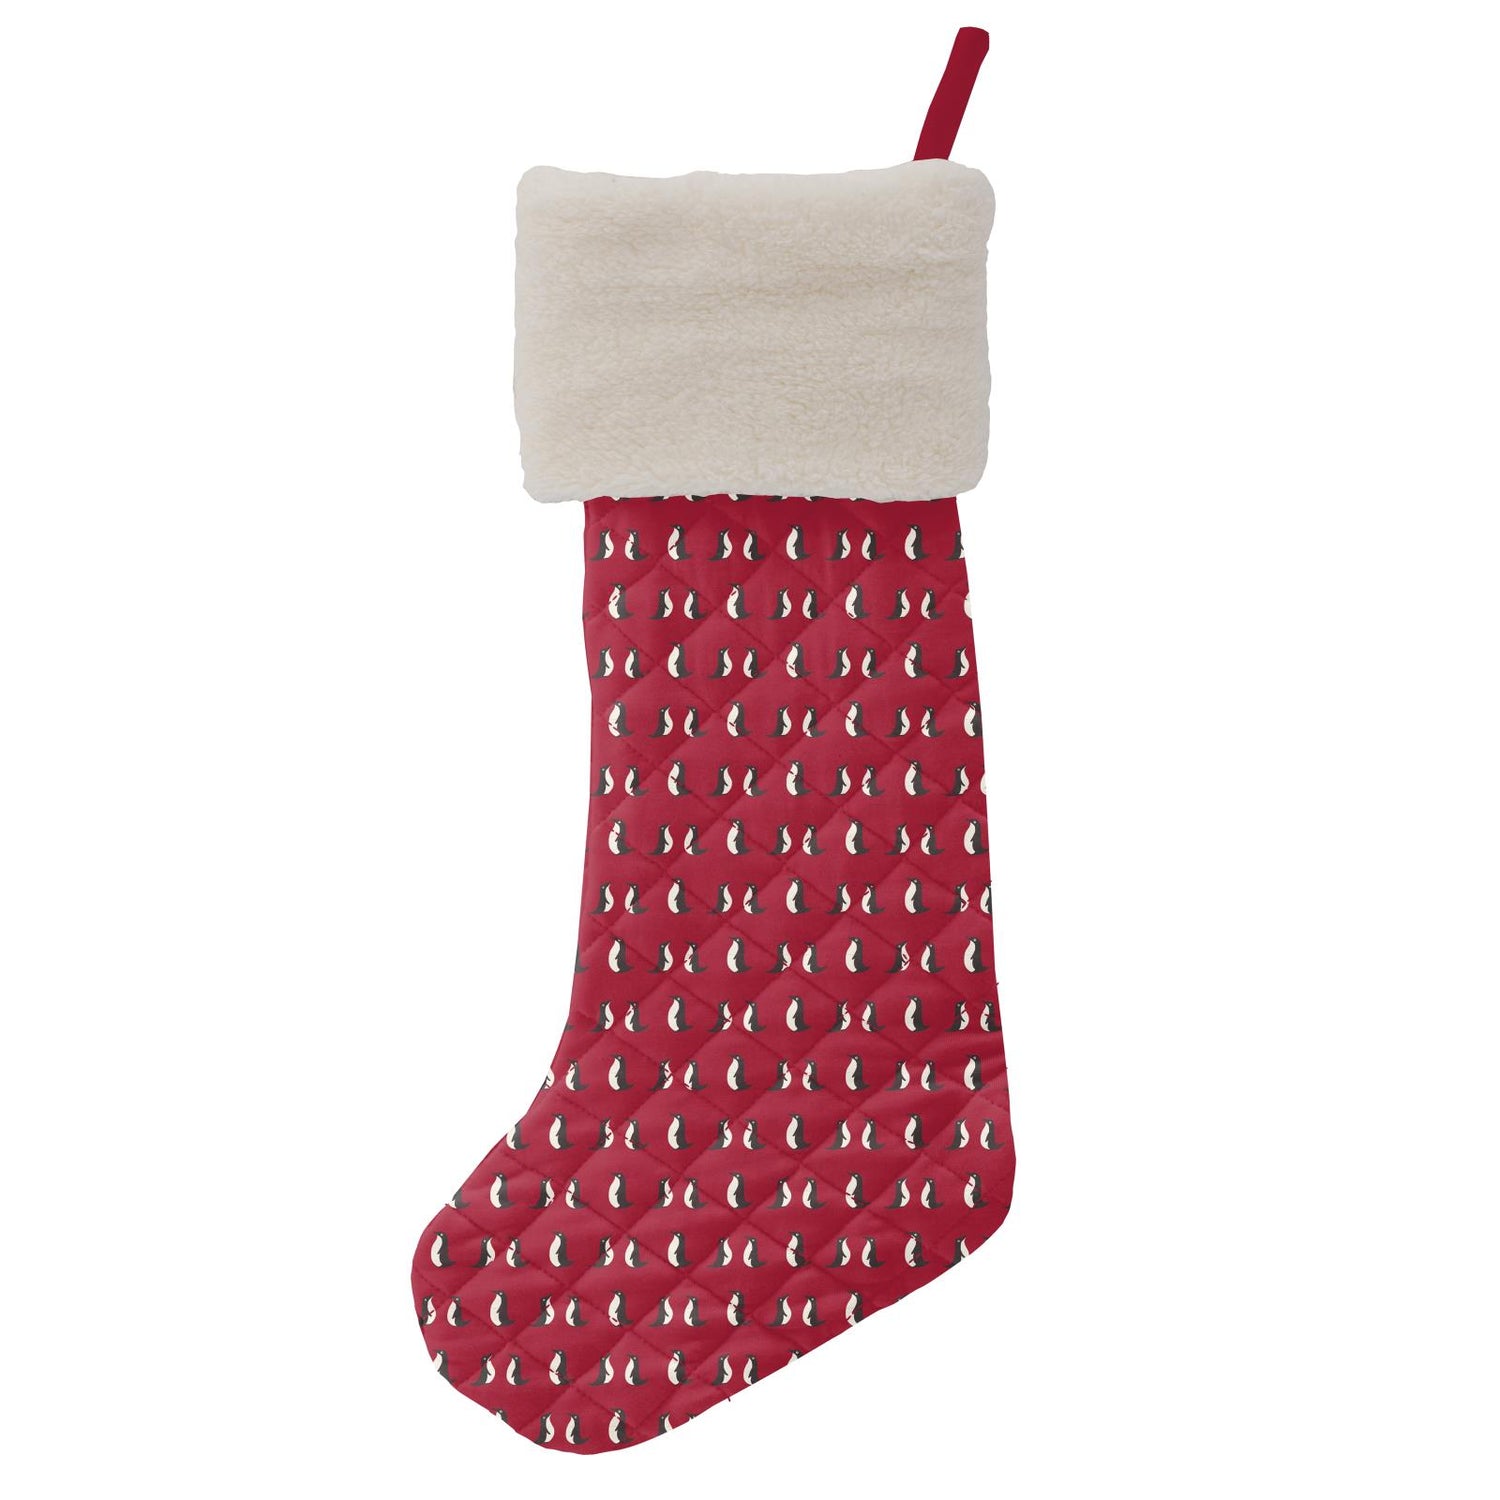 Quilted Stocking in Crimson Penguin/Midnight Holiday Plaid